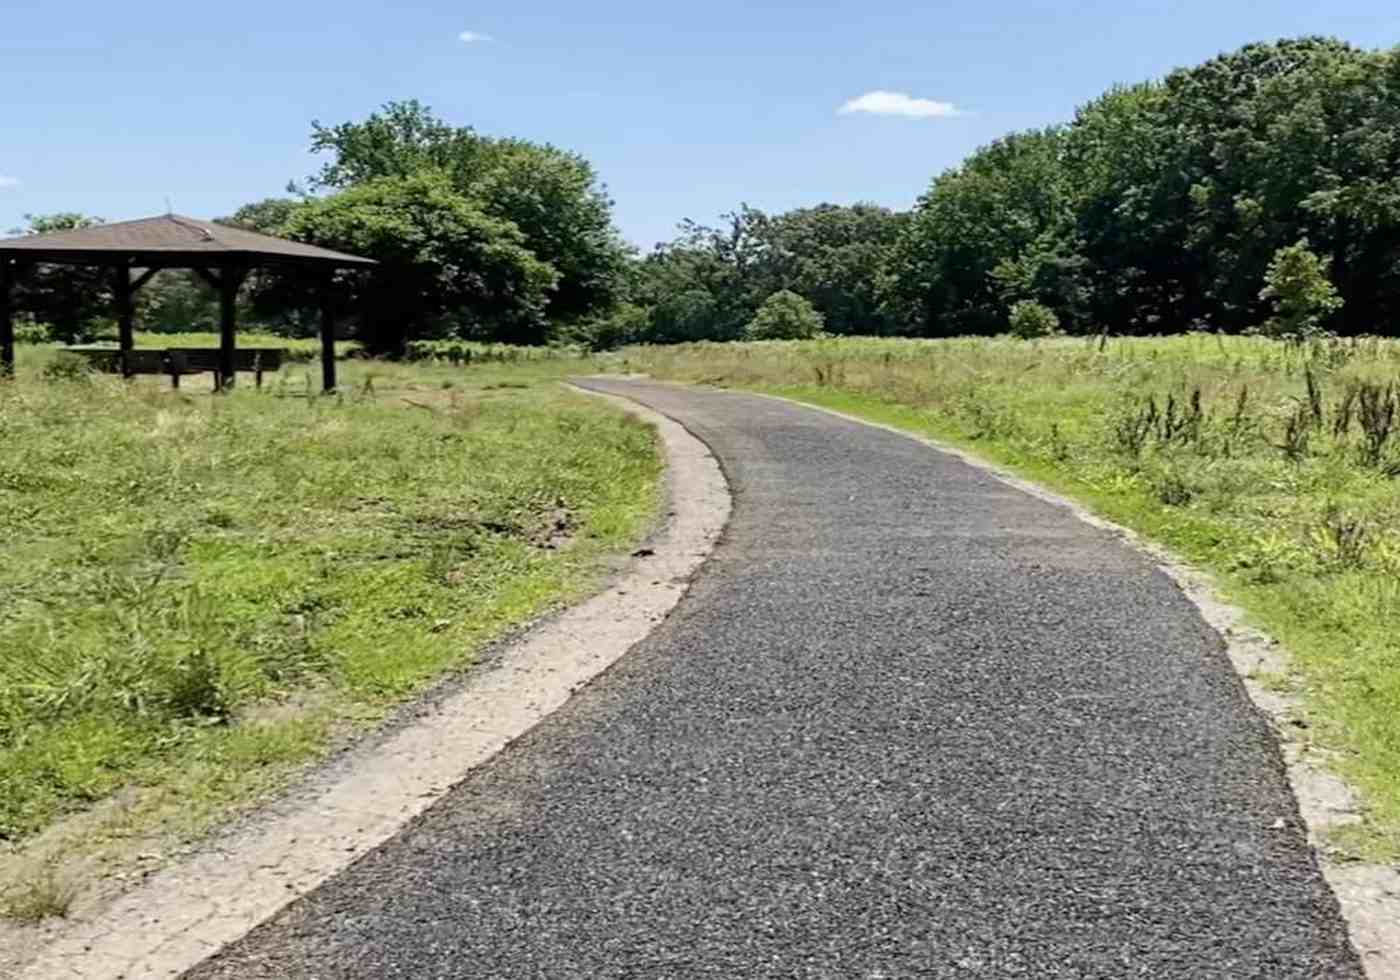 Trail made by recycled tires